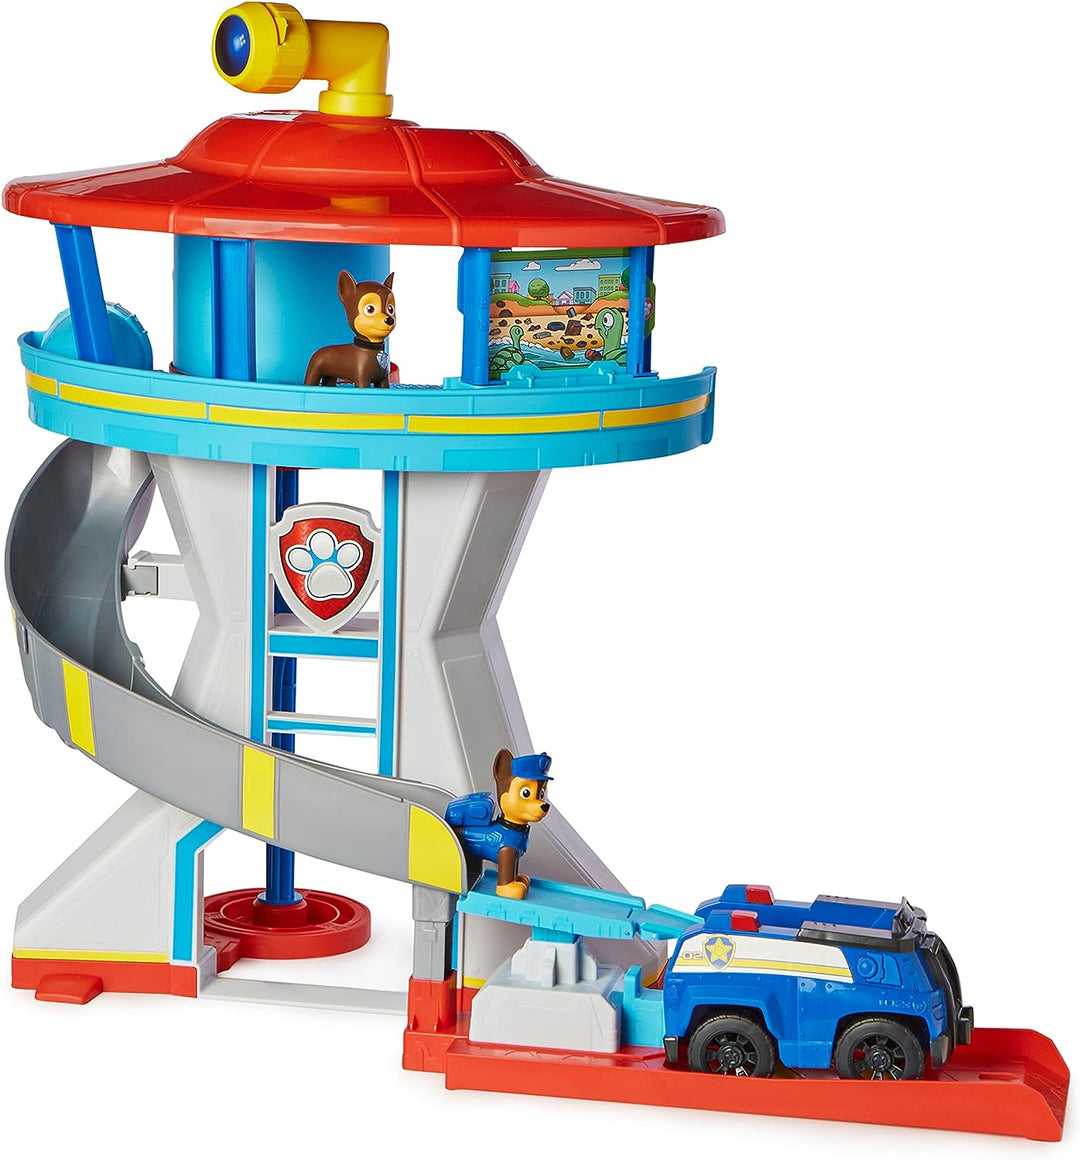 Paw Patrol Lookout Tower Playset with Toy Car Launcher, 2 Chase Action Figures